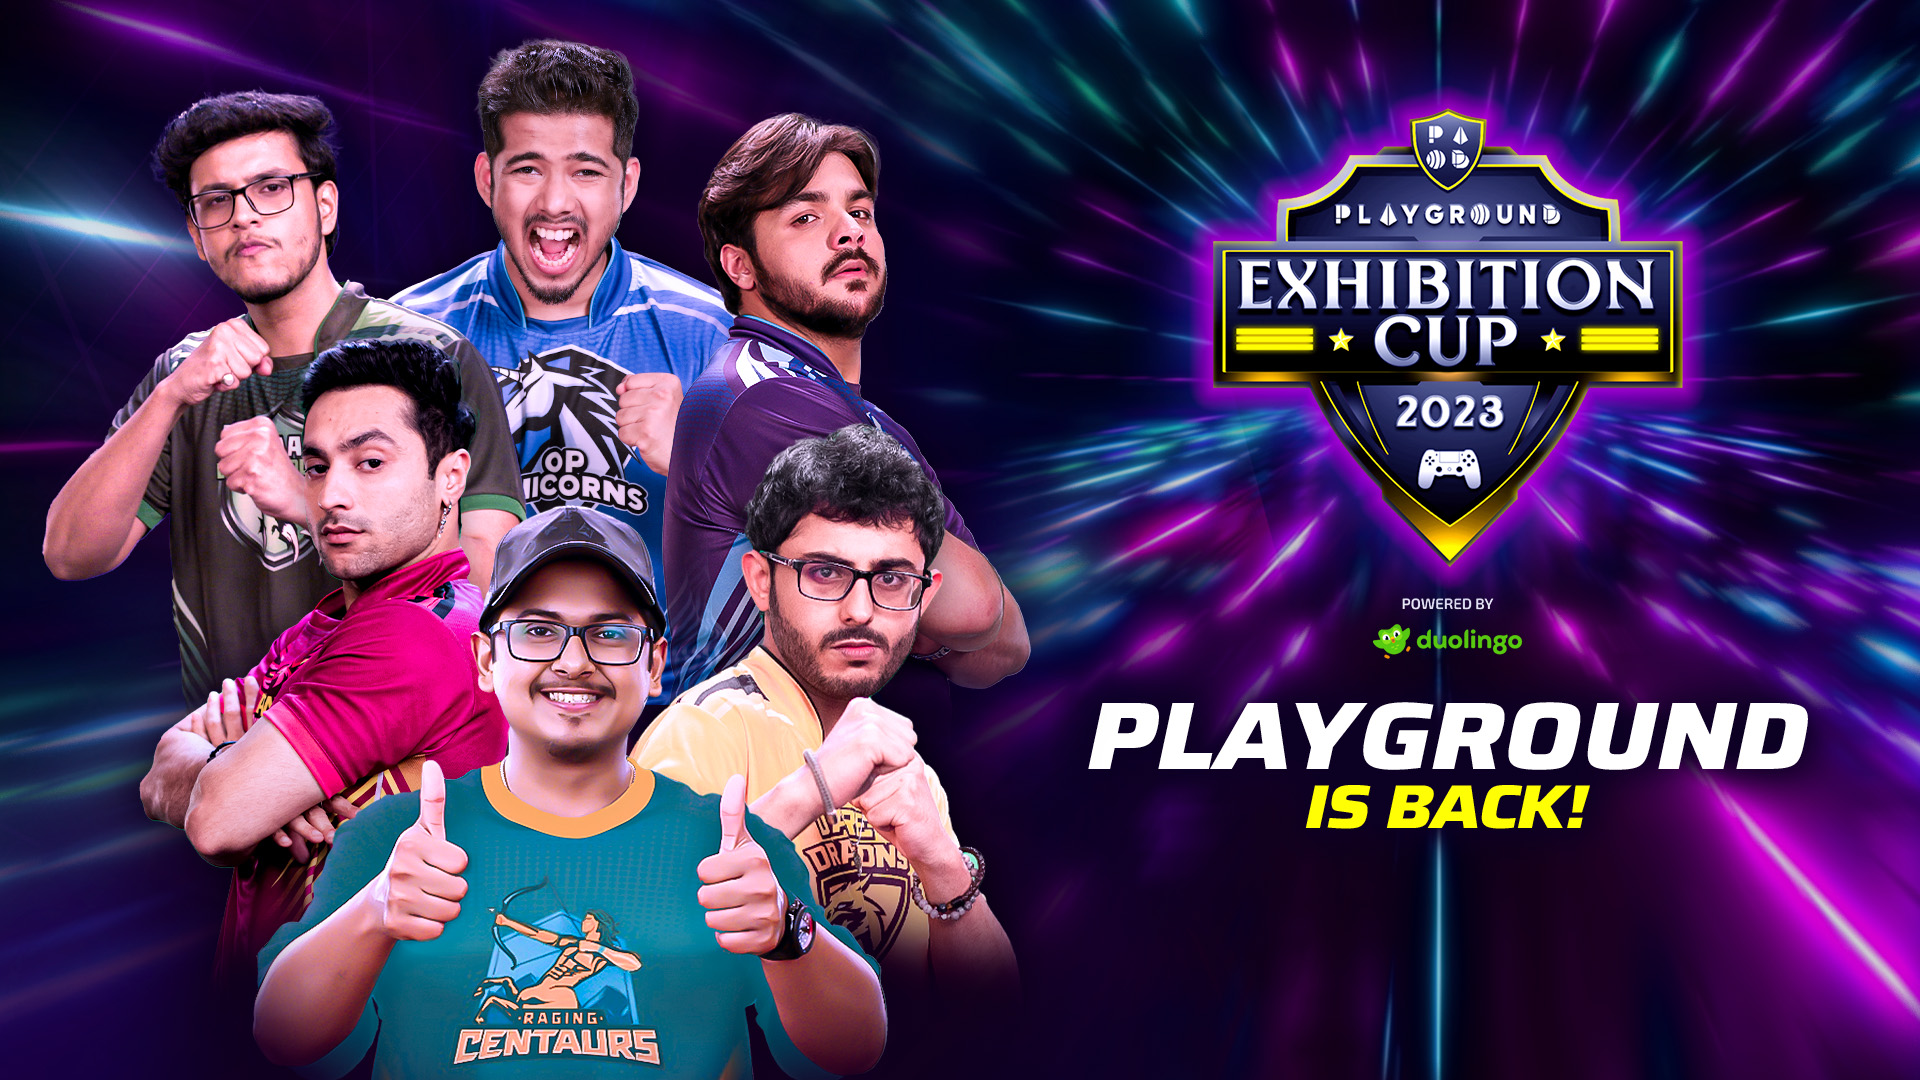 Playground Exhibition Cup 2023 set to take competitive gaming to new heights, CH..